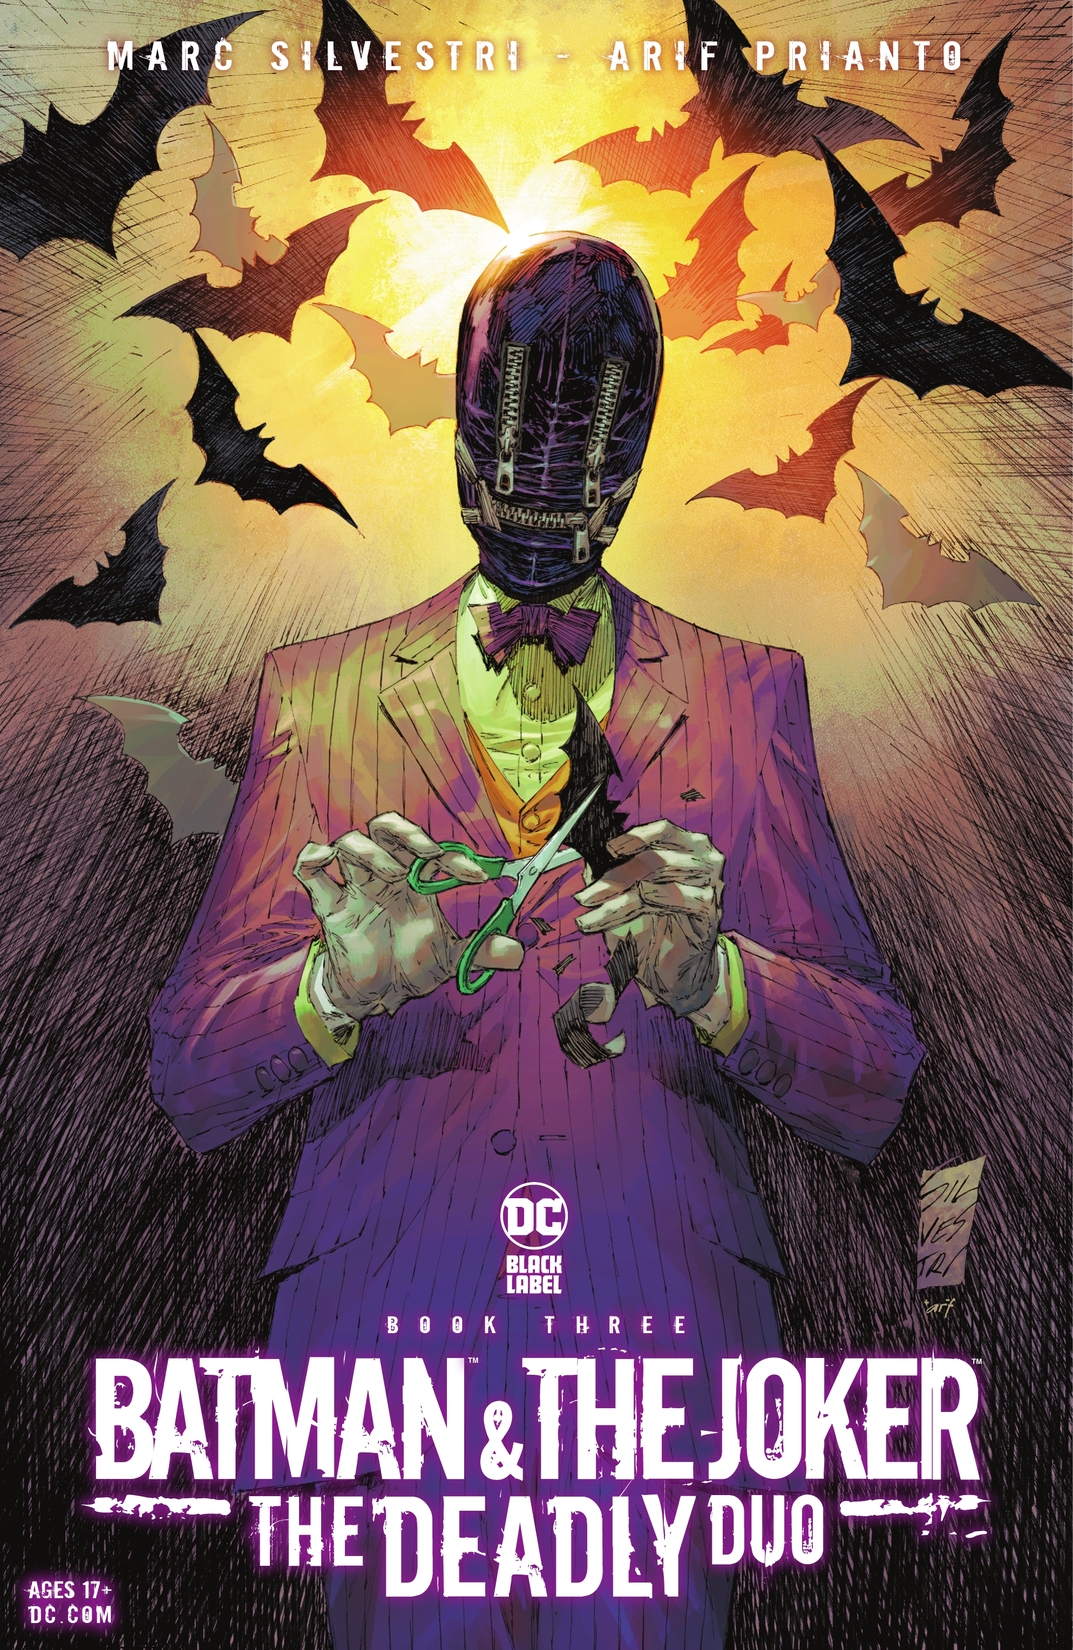 Batman & The Joker: The Deadly Duo #3 preview images